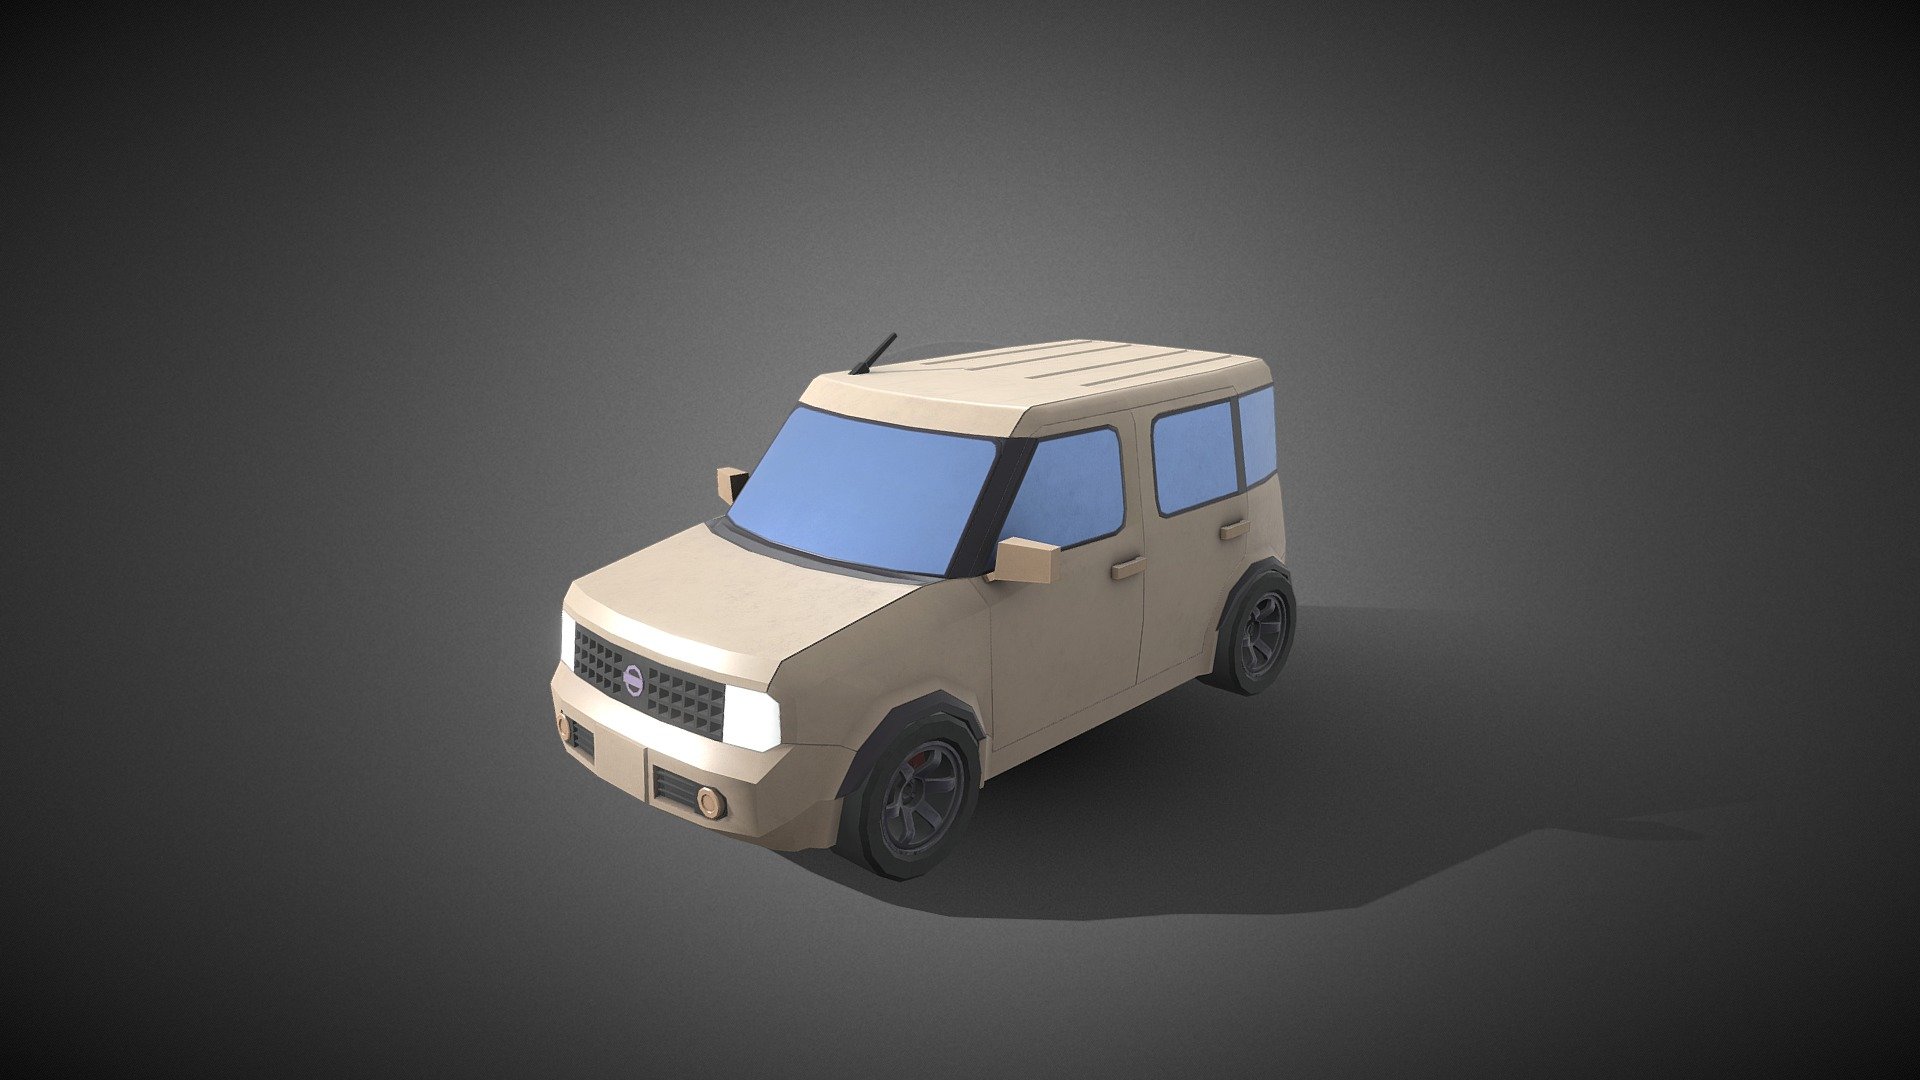 I bought this car two years ago and I decided to model it just to share it to everyone, lol.
It has 4362 faces.
Modeled it in Maya, textured in Substance 3D 3d model